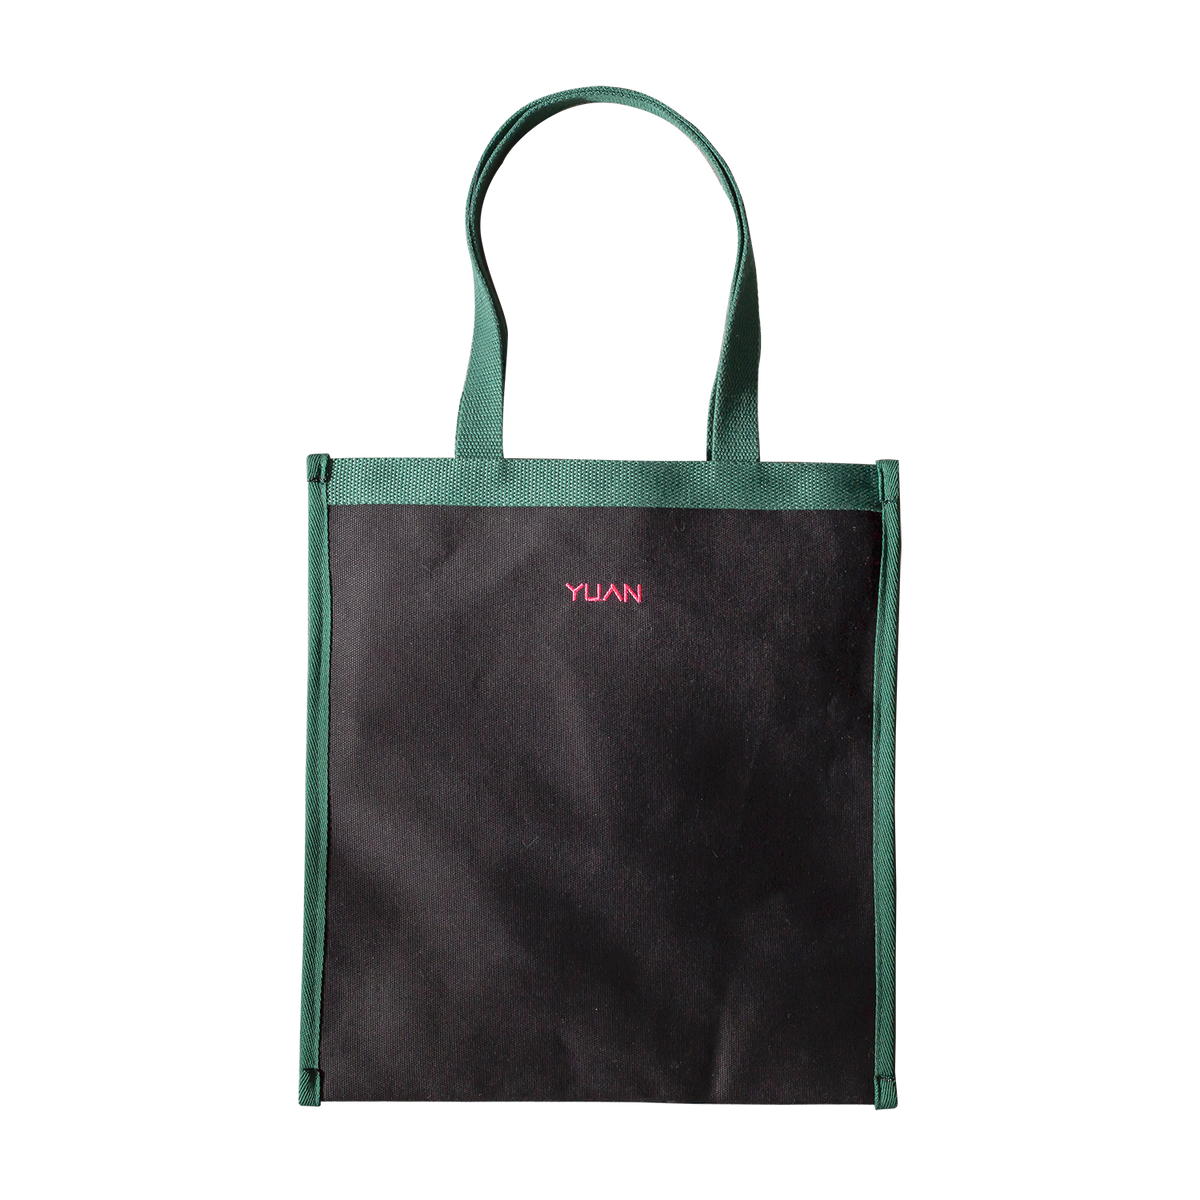 YUAN online exclusive "beast wishes" canvas tote